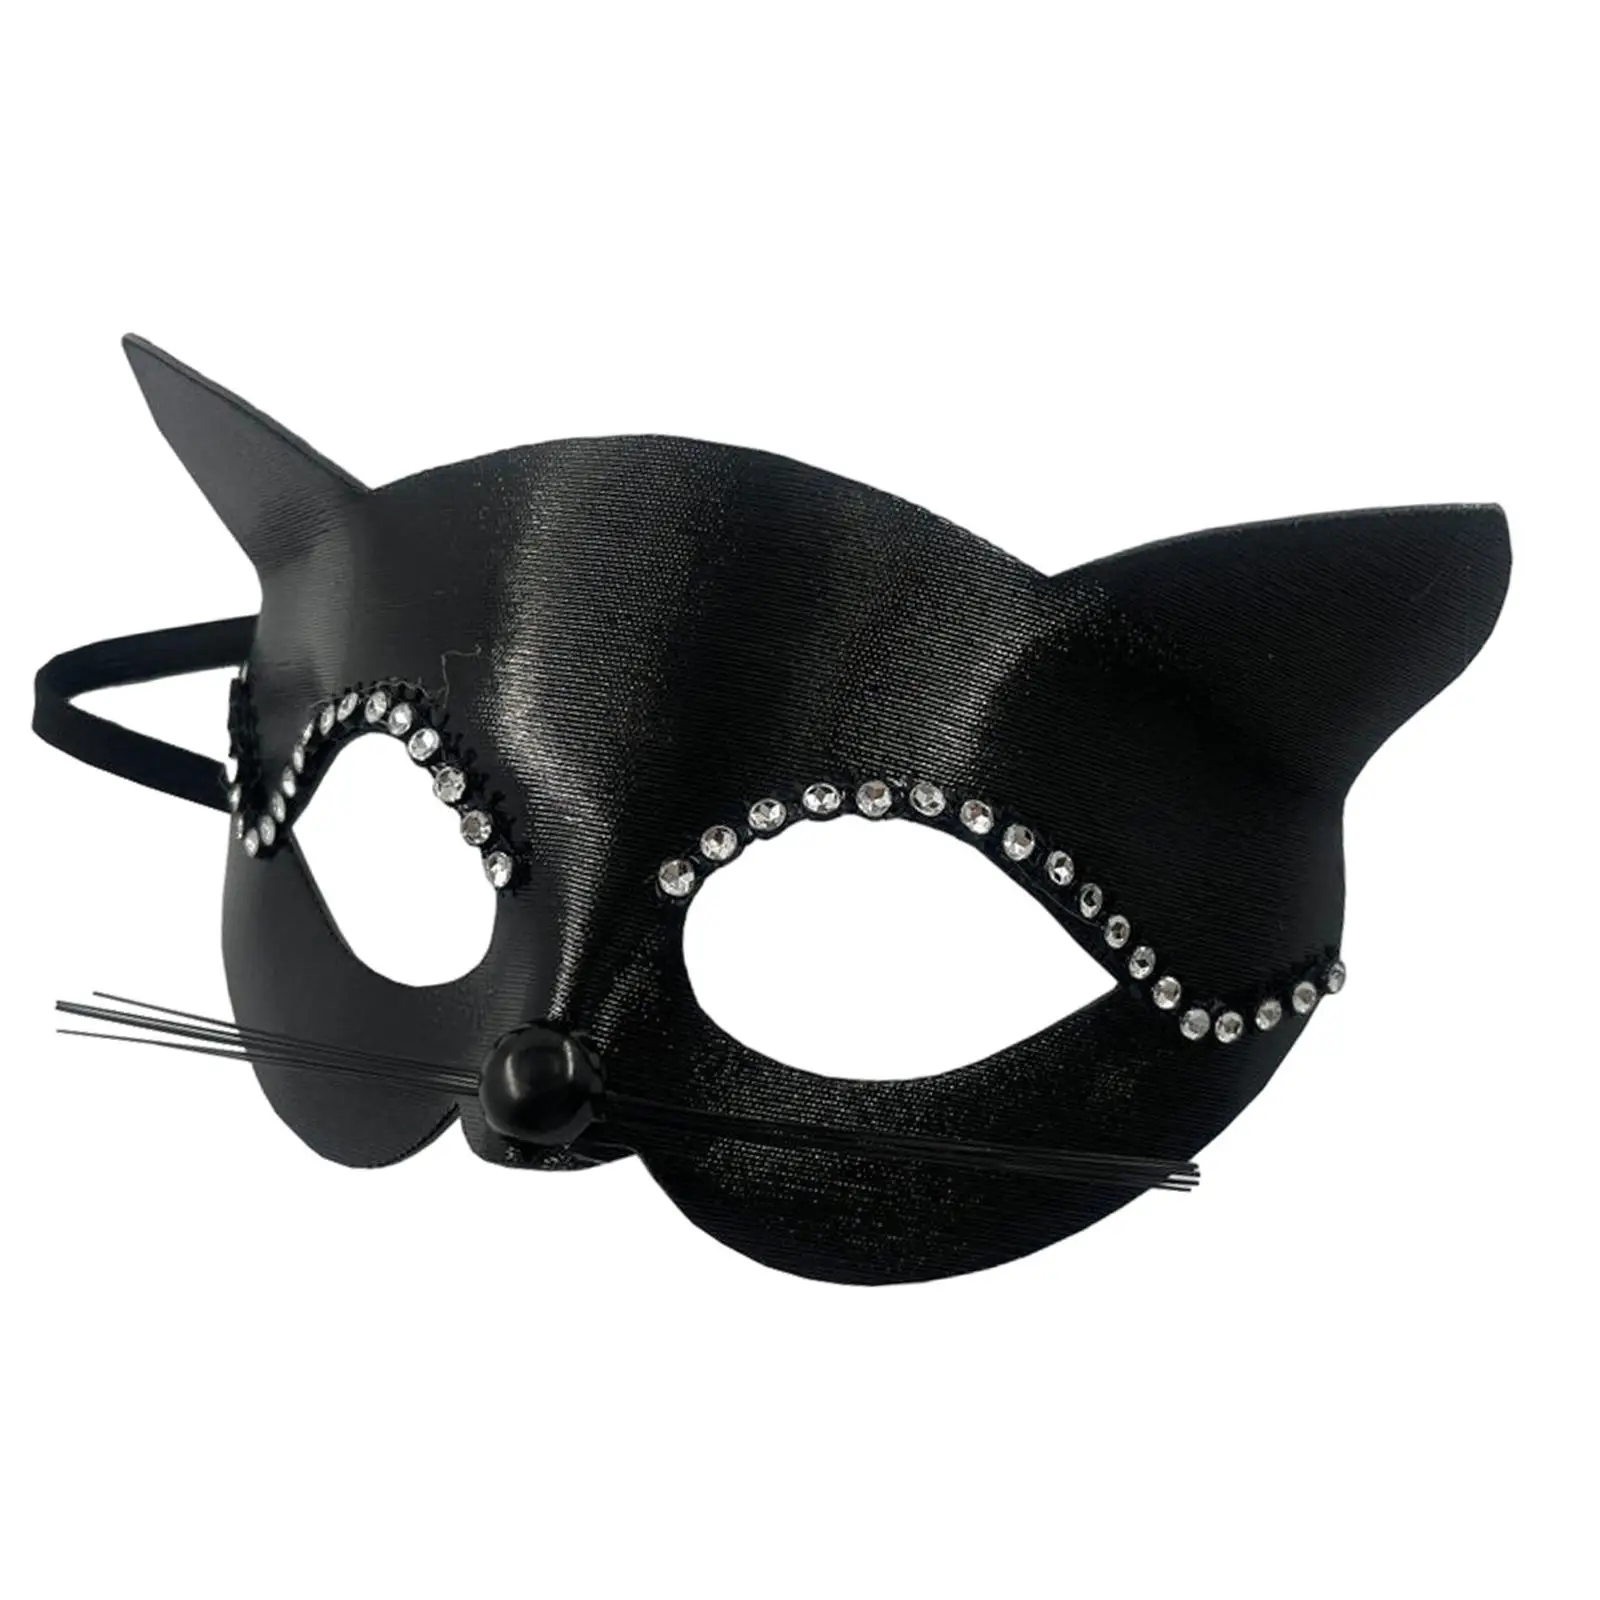 Black Cat Mask with Whiskers Masquerade Mask for Halloween Costume Show